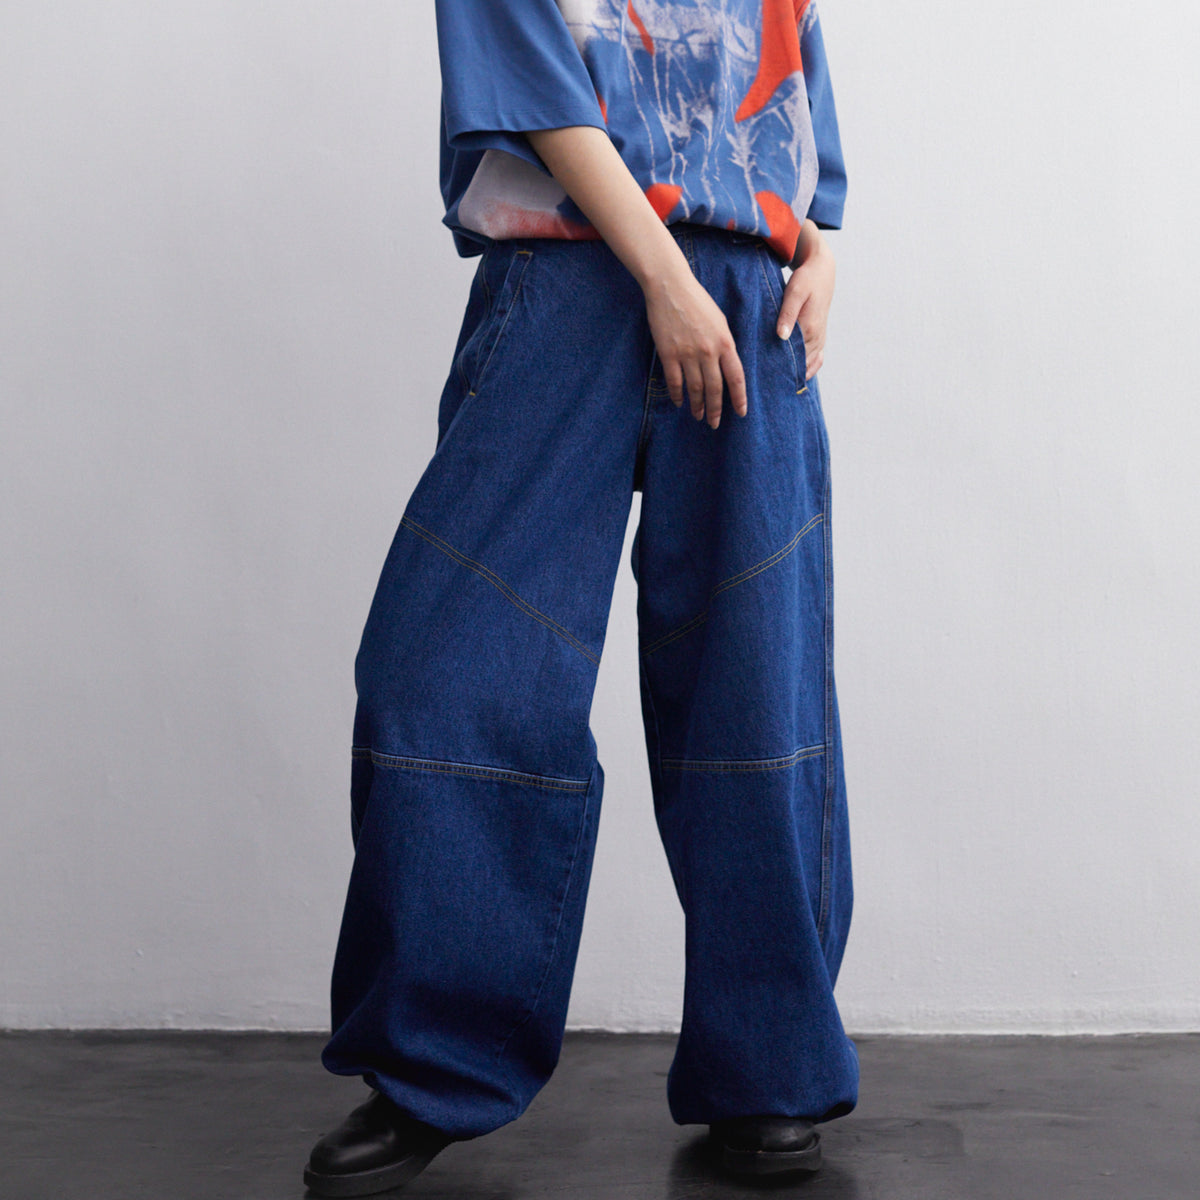 WILLY CHAVARRIA / RAVER PANT WASHED BLUE DENIM